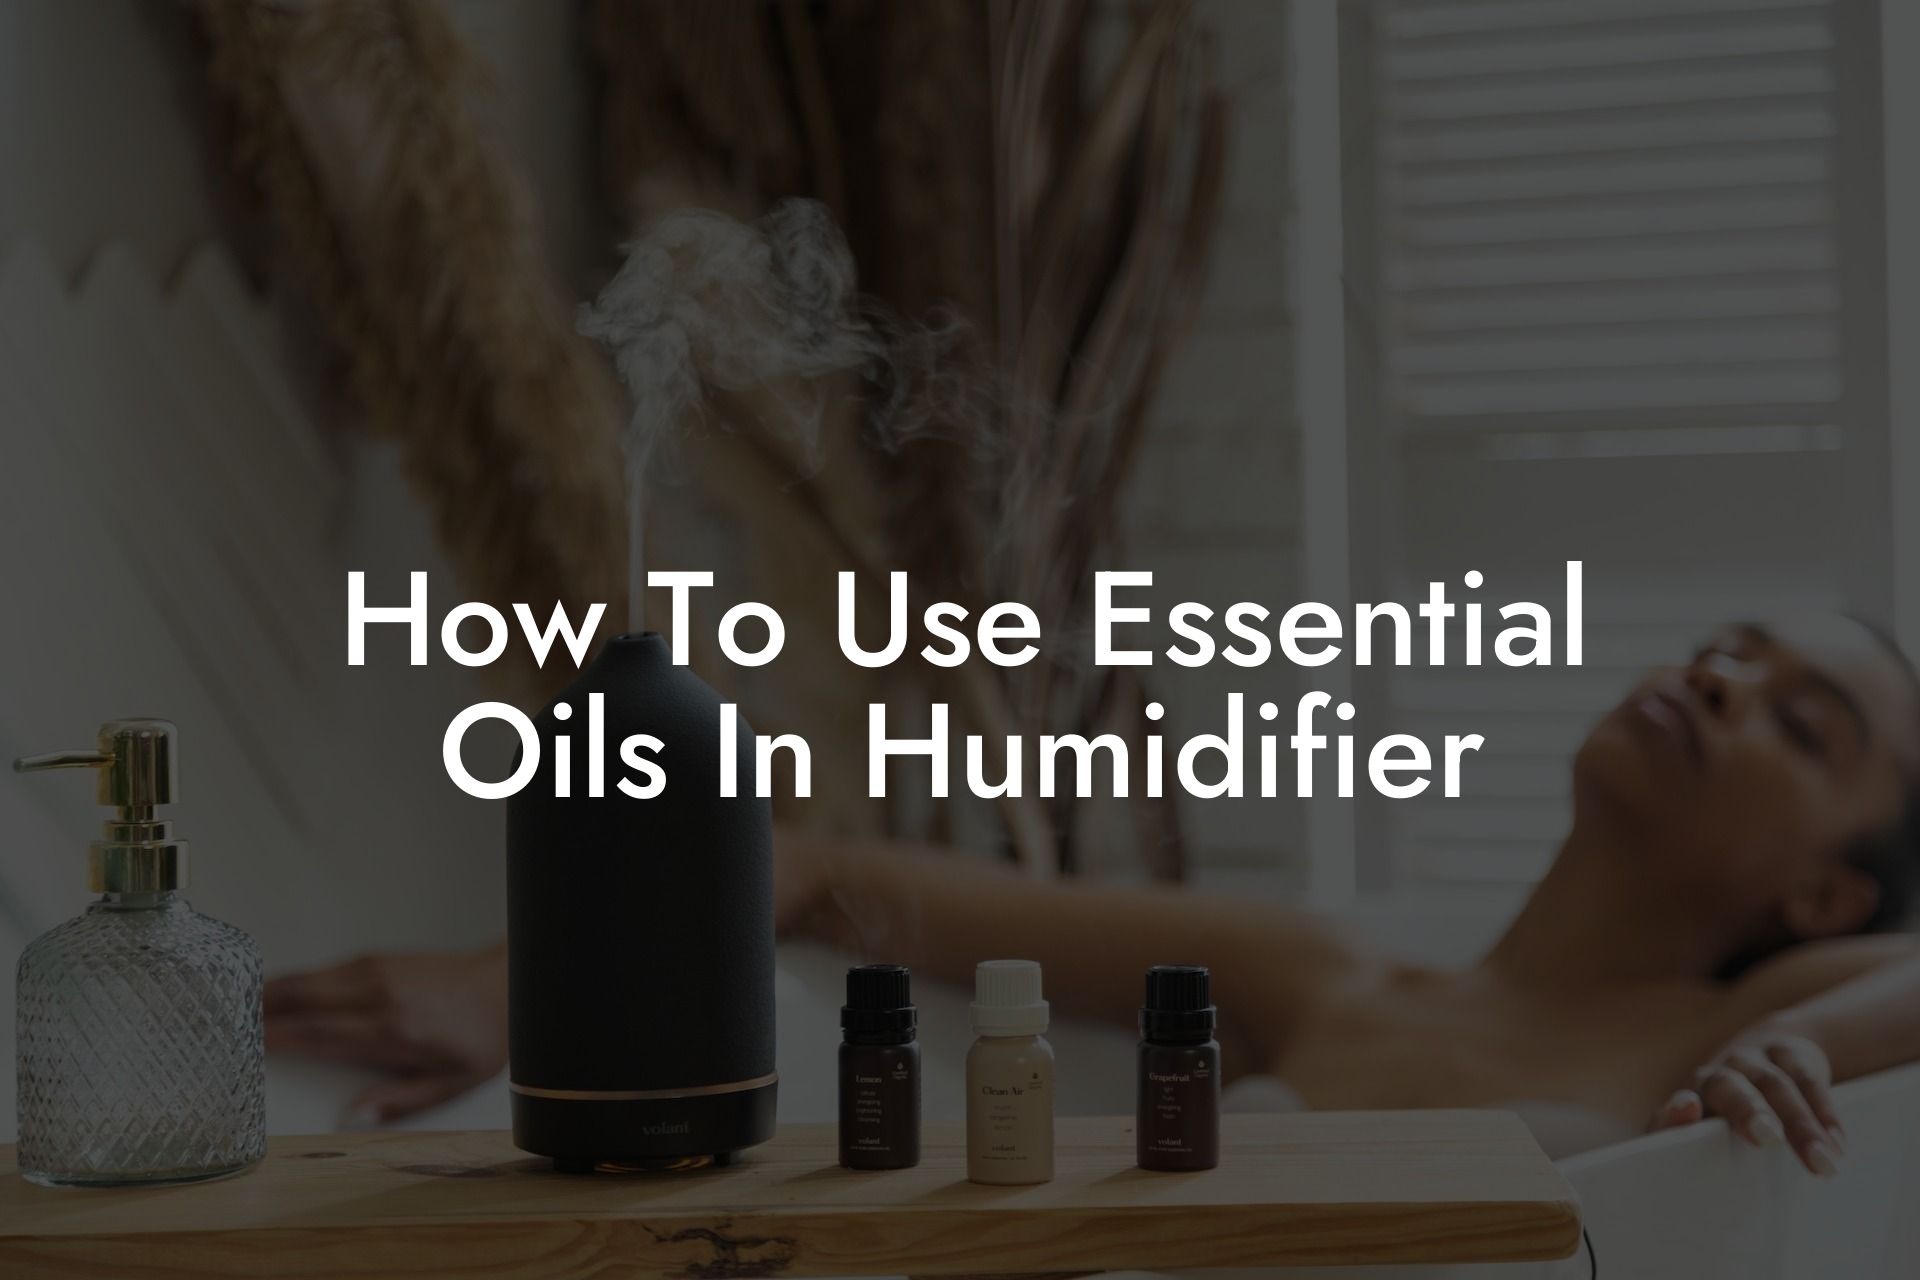 How To Use Essential Oils In Humidifier